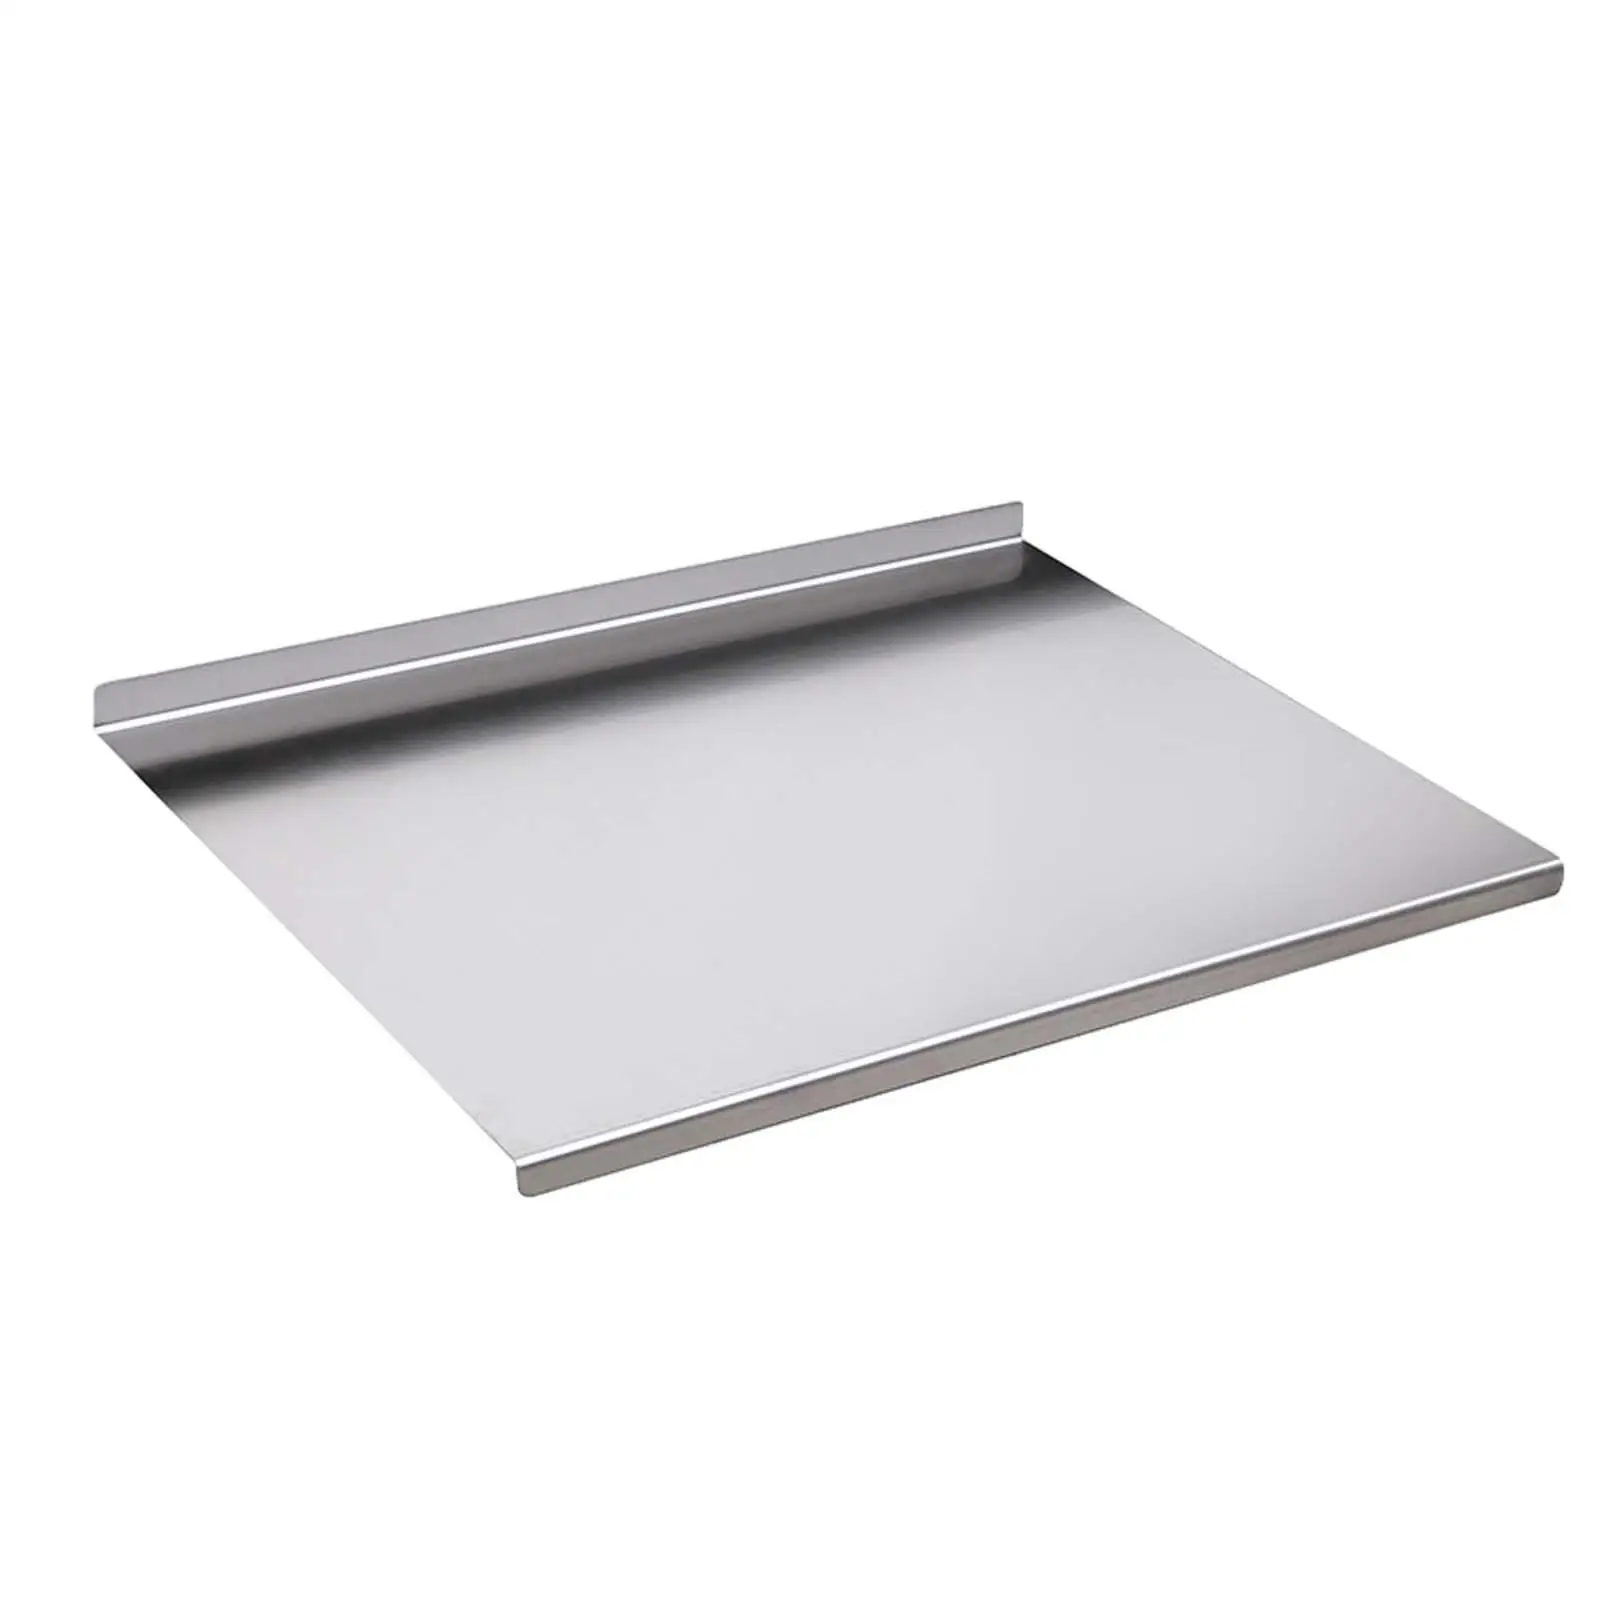 Stainless Steel Chopping Board Nonstick Easy to Clean Kitchen Shaped Hem Sturdy Smooth Surface Extra Large Thick